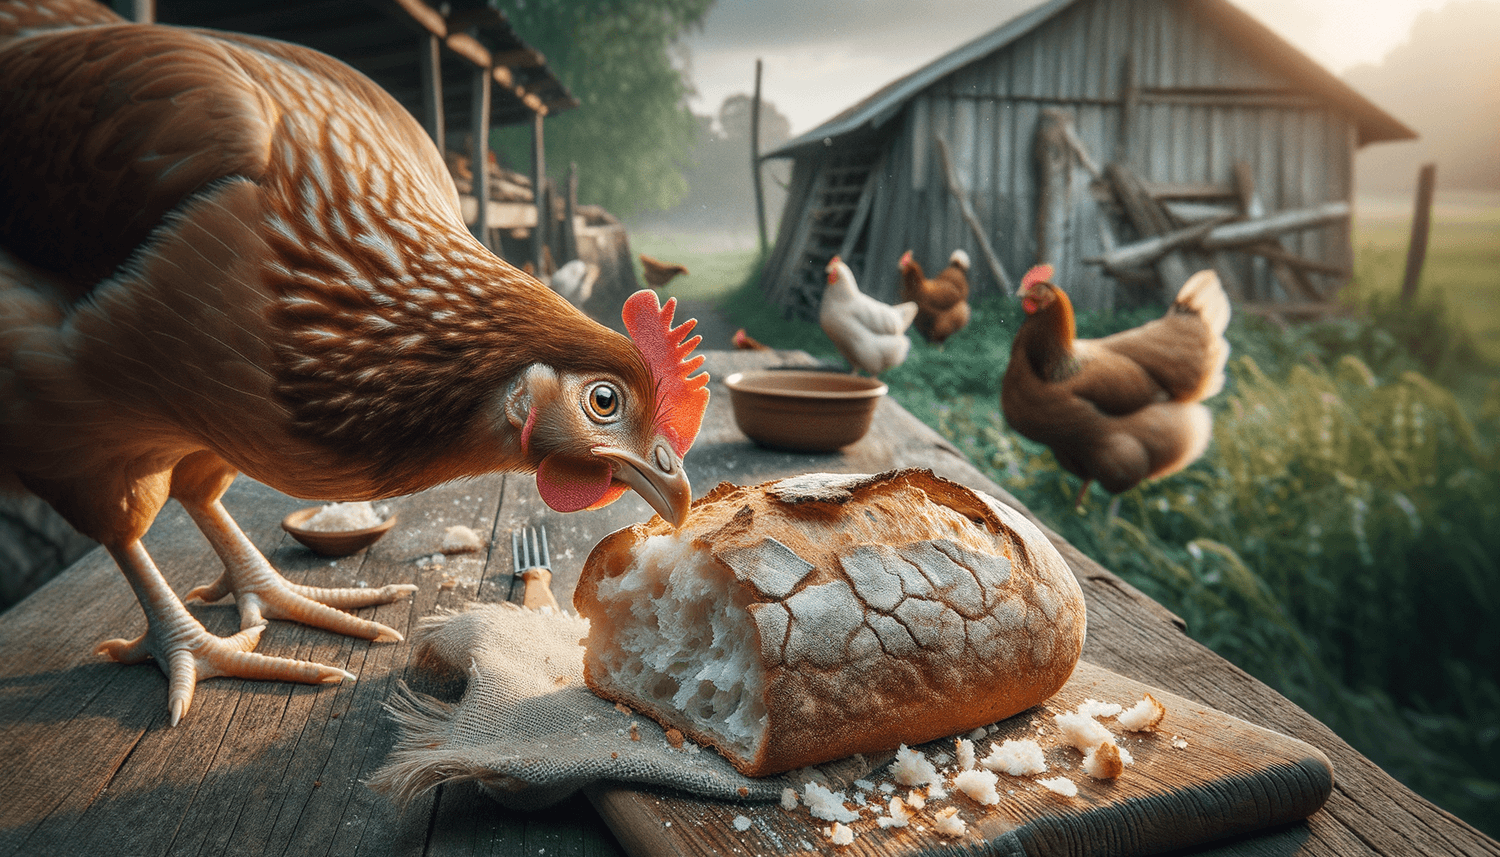 Can Chickens Eat Homemade Bread?